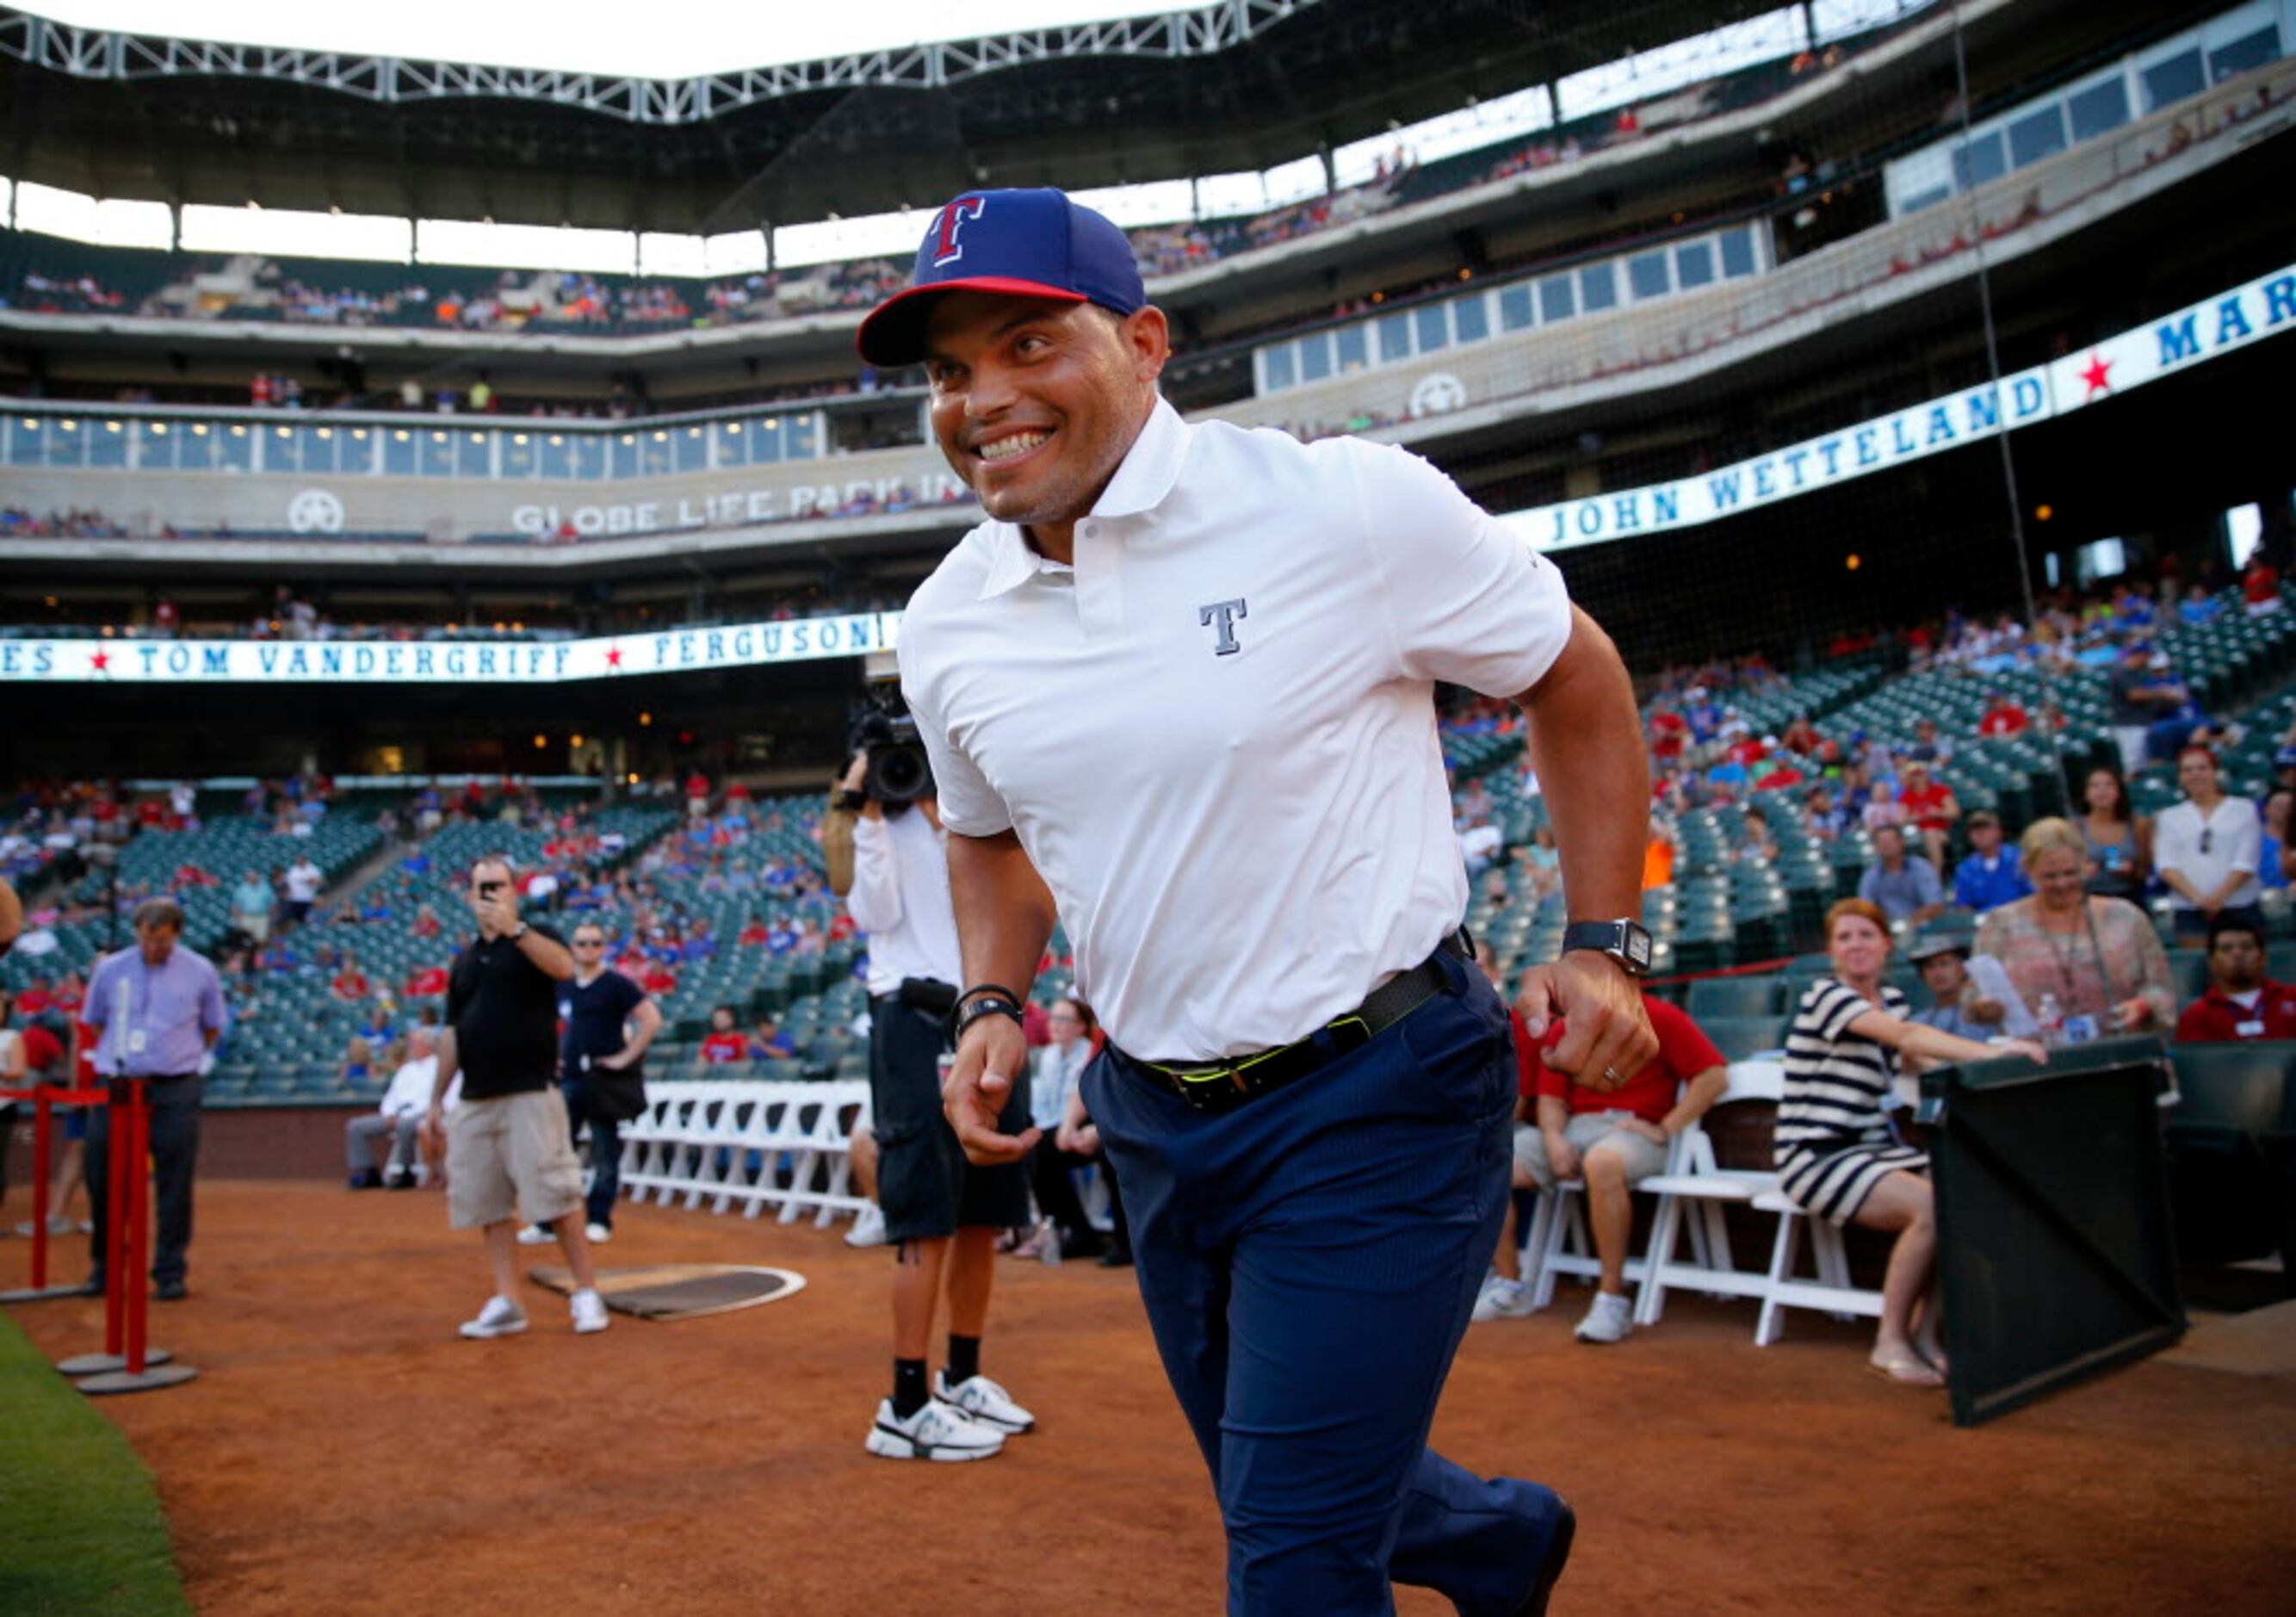 Behind the nickname: How Rangers great Ivan Rodriguez became Pudge